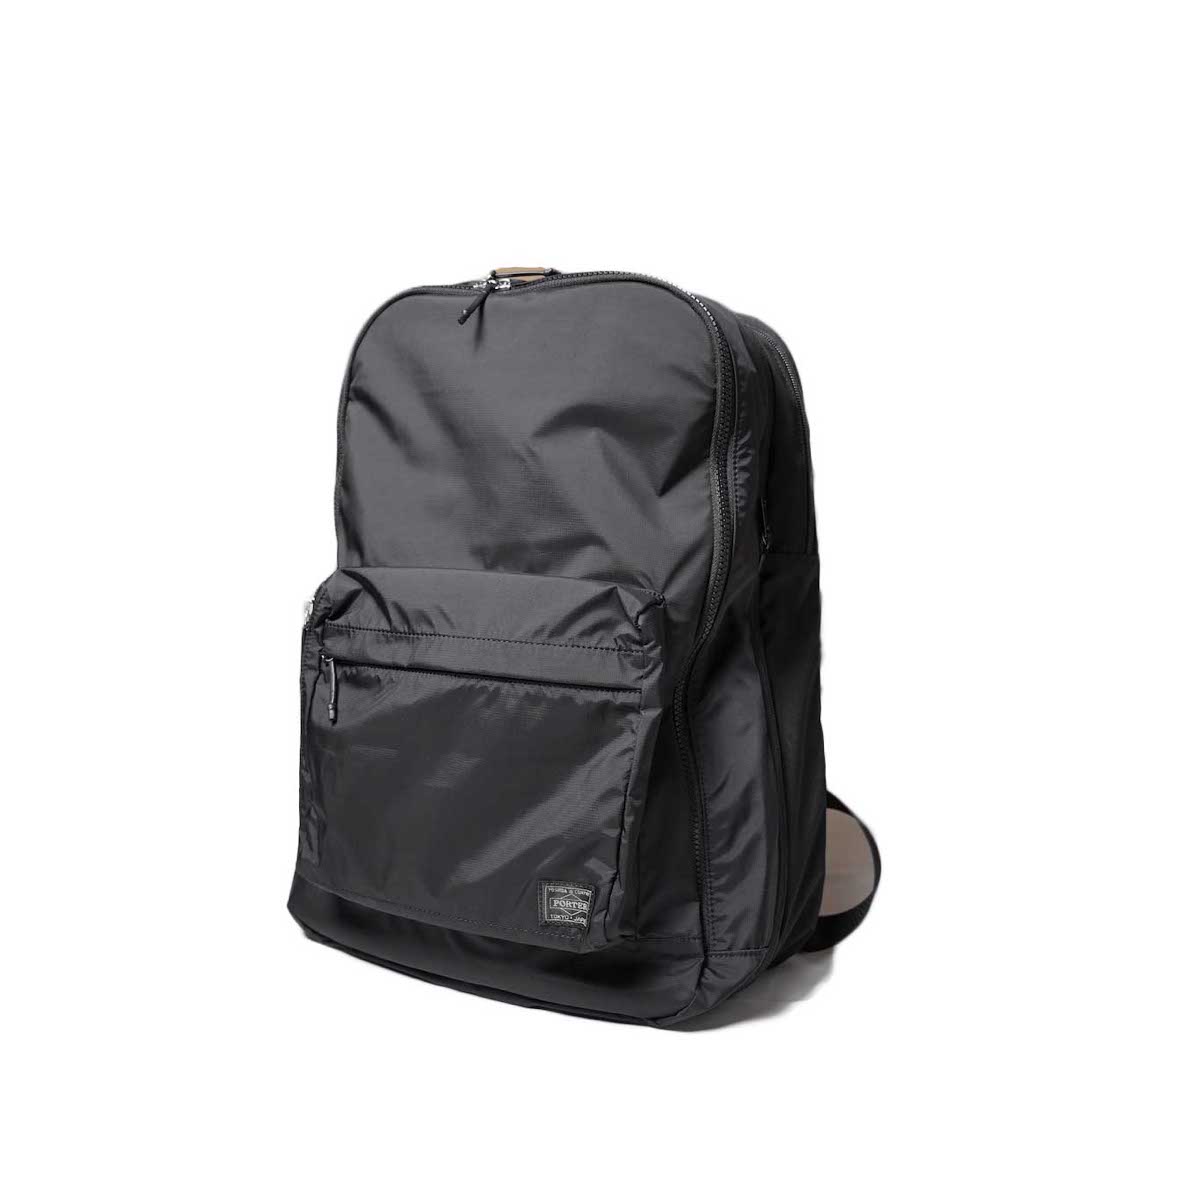 PORTER / "TWIN PACK" DAY PACK L (893-19715)